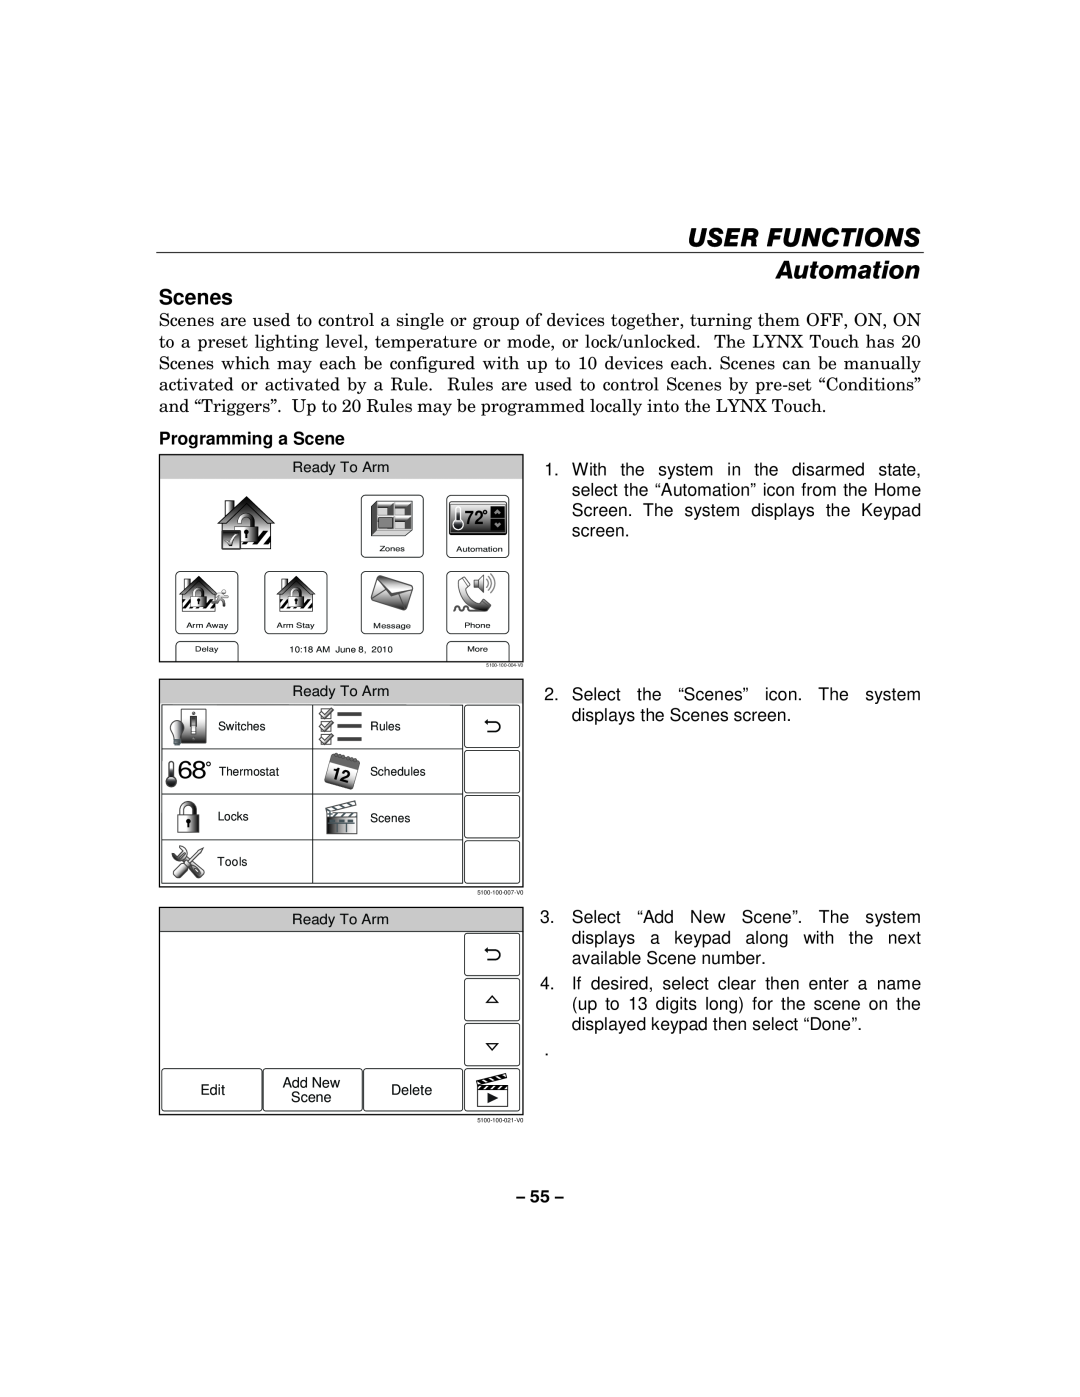 Honeywell L5100 manual Scenes, Programming a Scene, USER FUNCTIONS Automation 